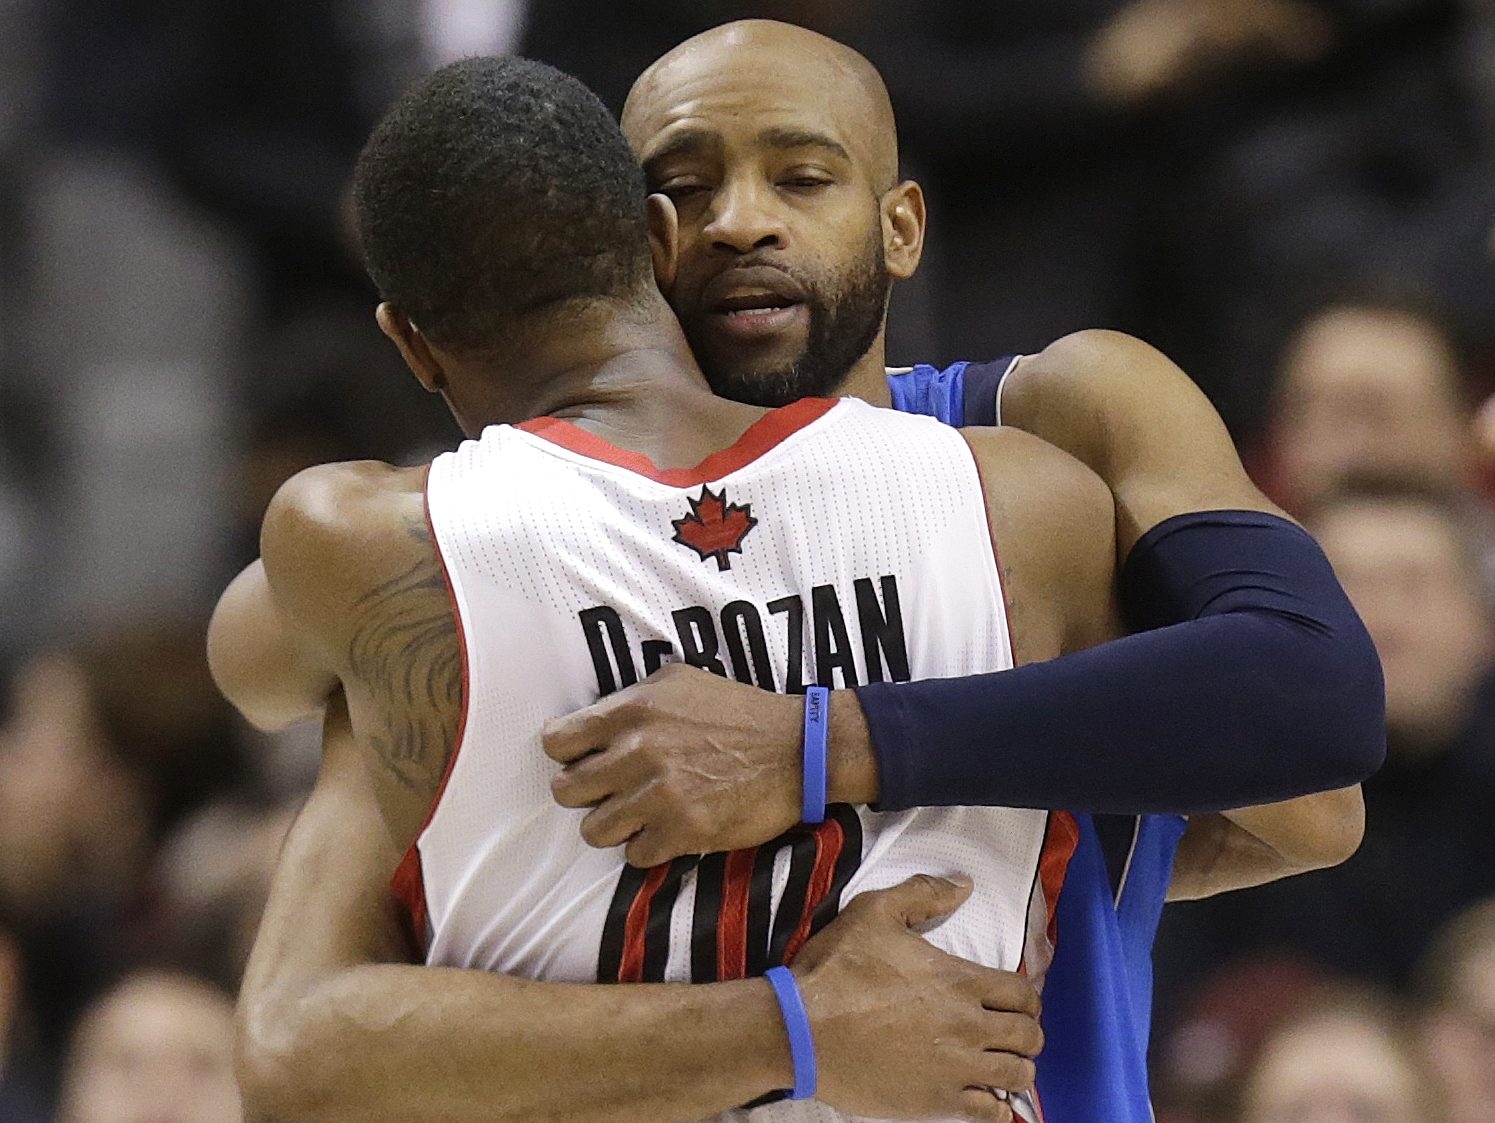 Why many Raptors fans refuse to forgive Vince Carter and how